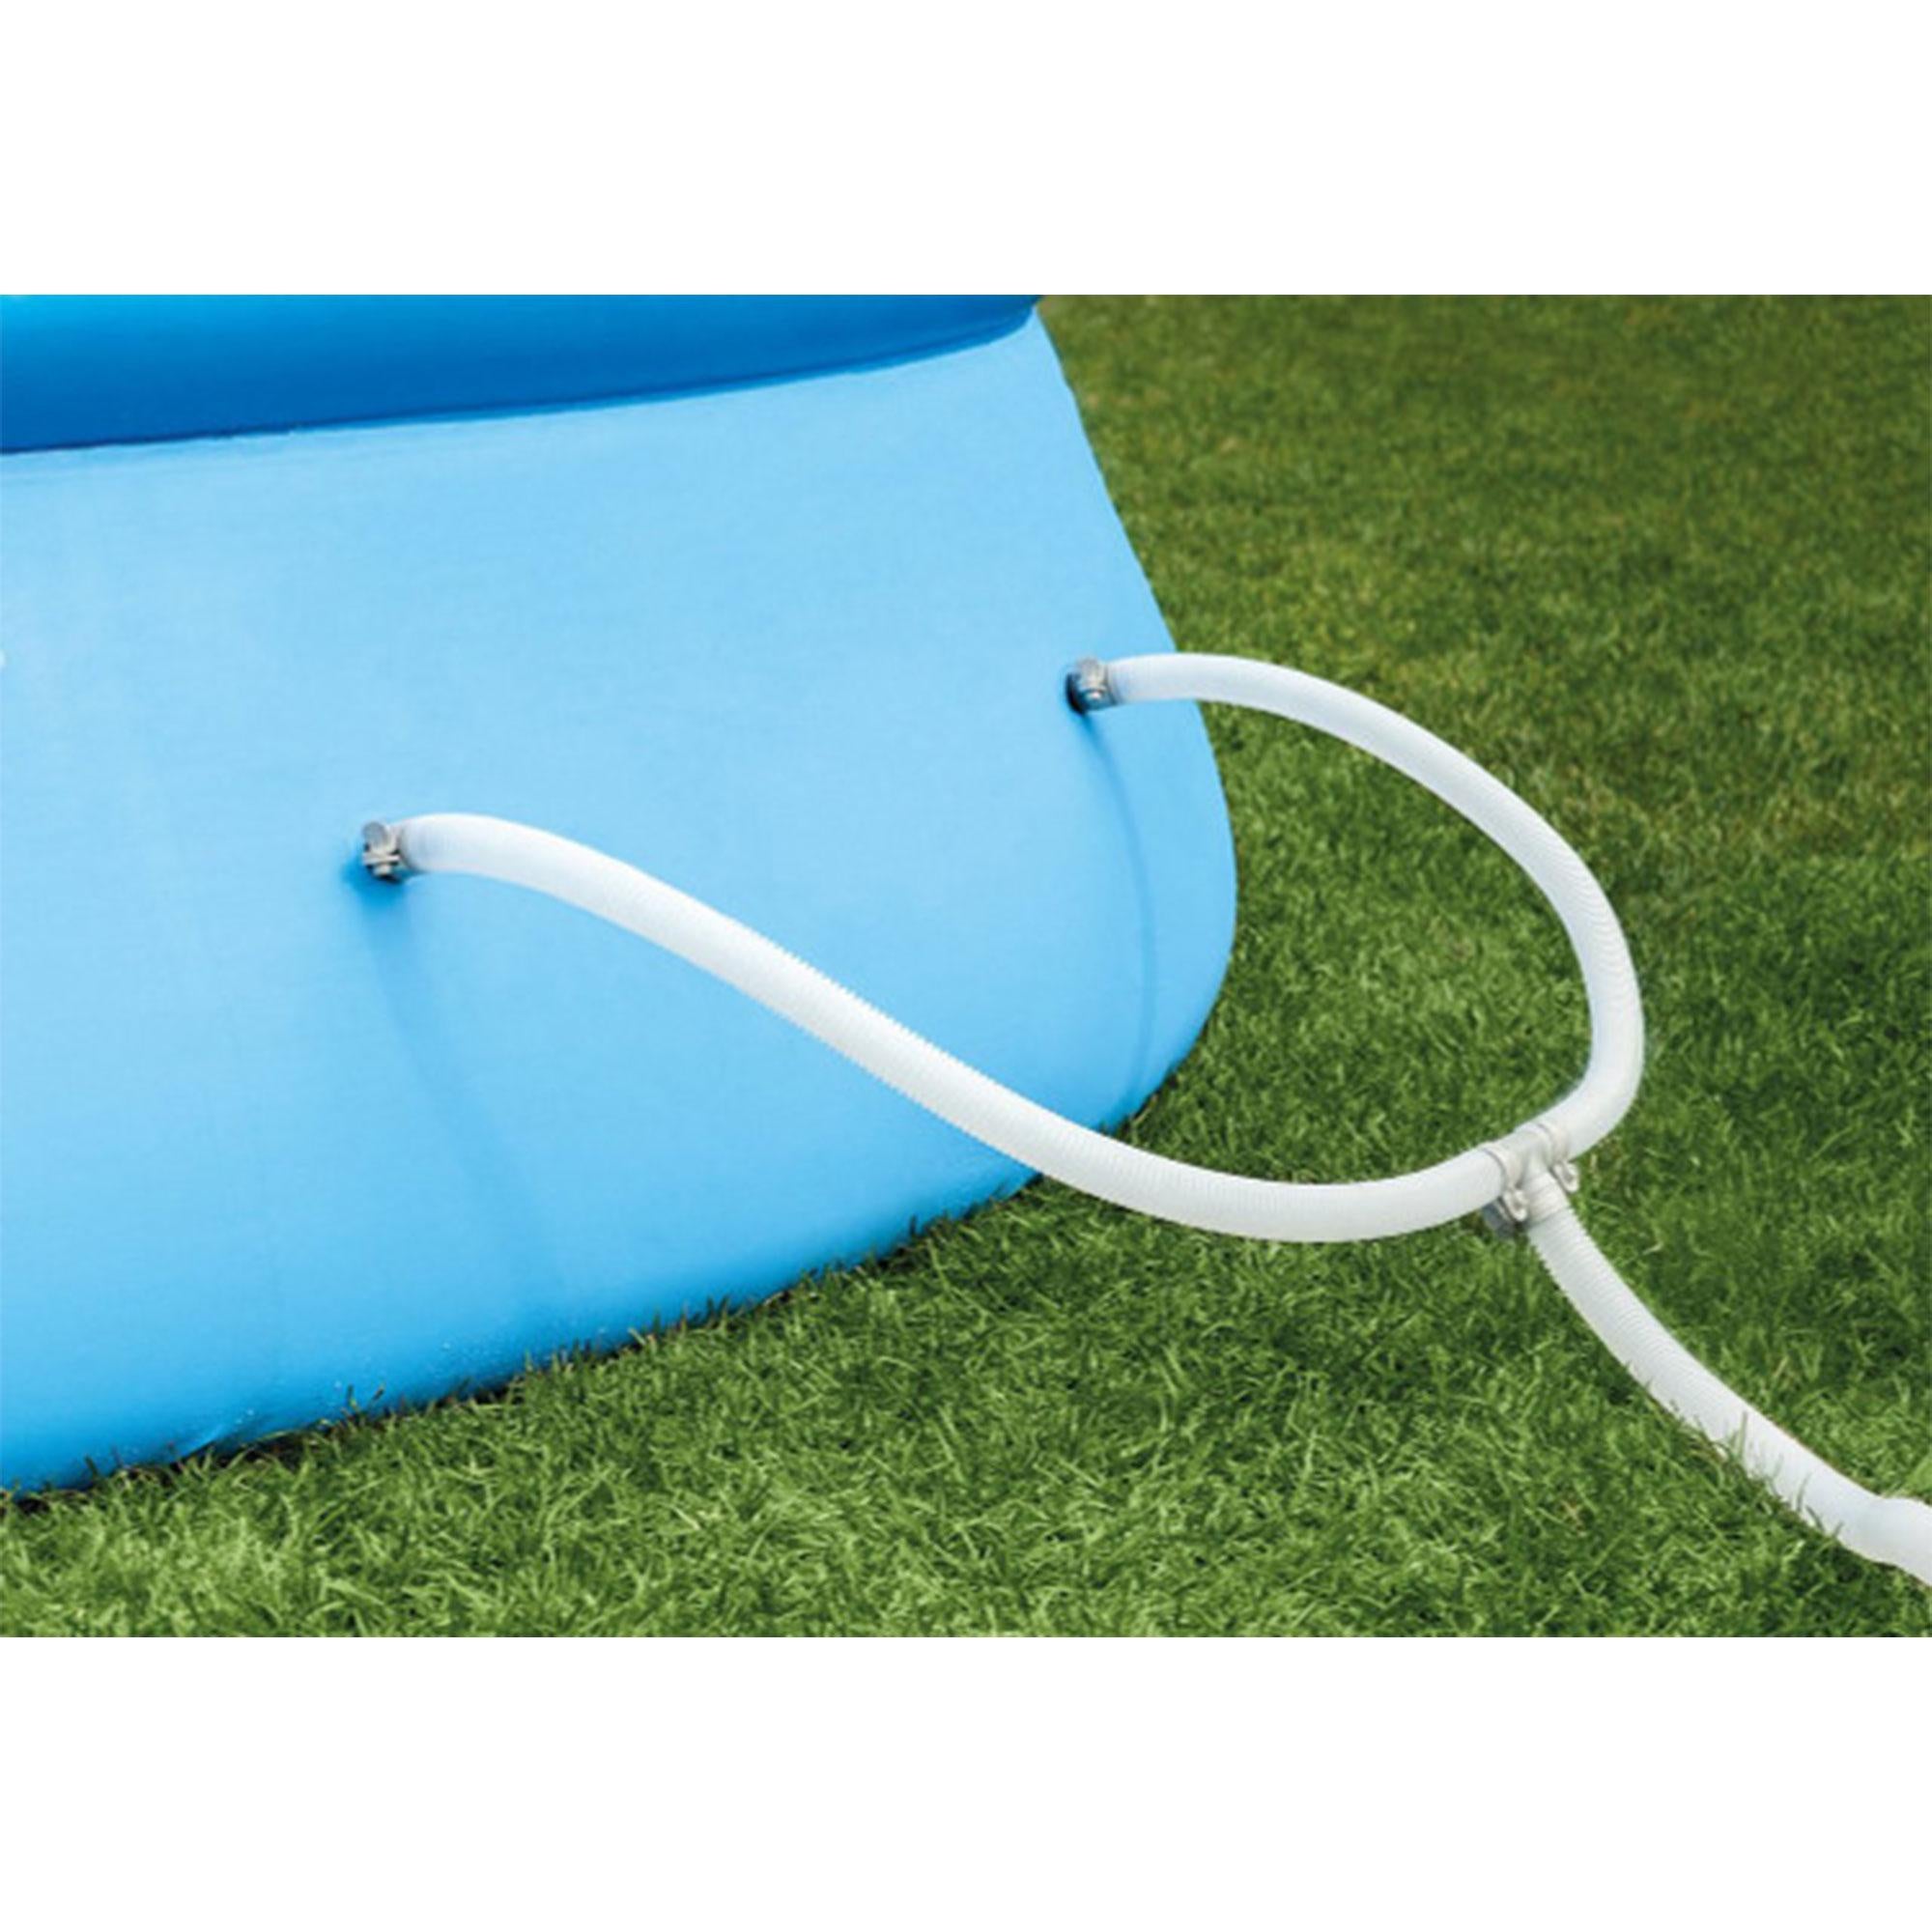 Intex 18' x 48" Inflatable Above Ground Pool Set with Filter Cartridges (6 Pack) - Bargainwizz